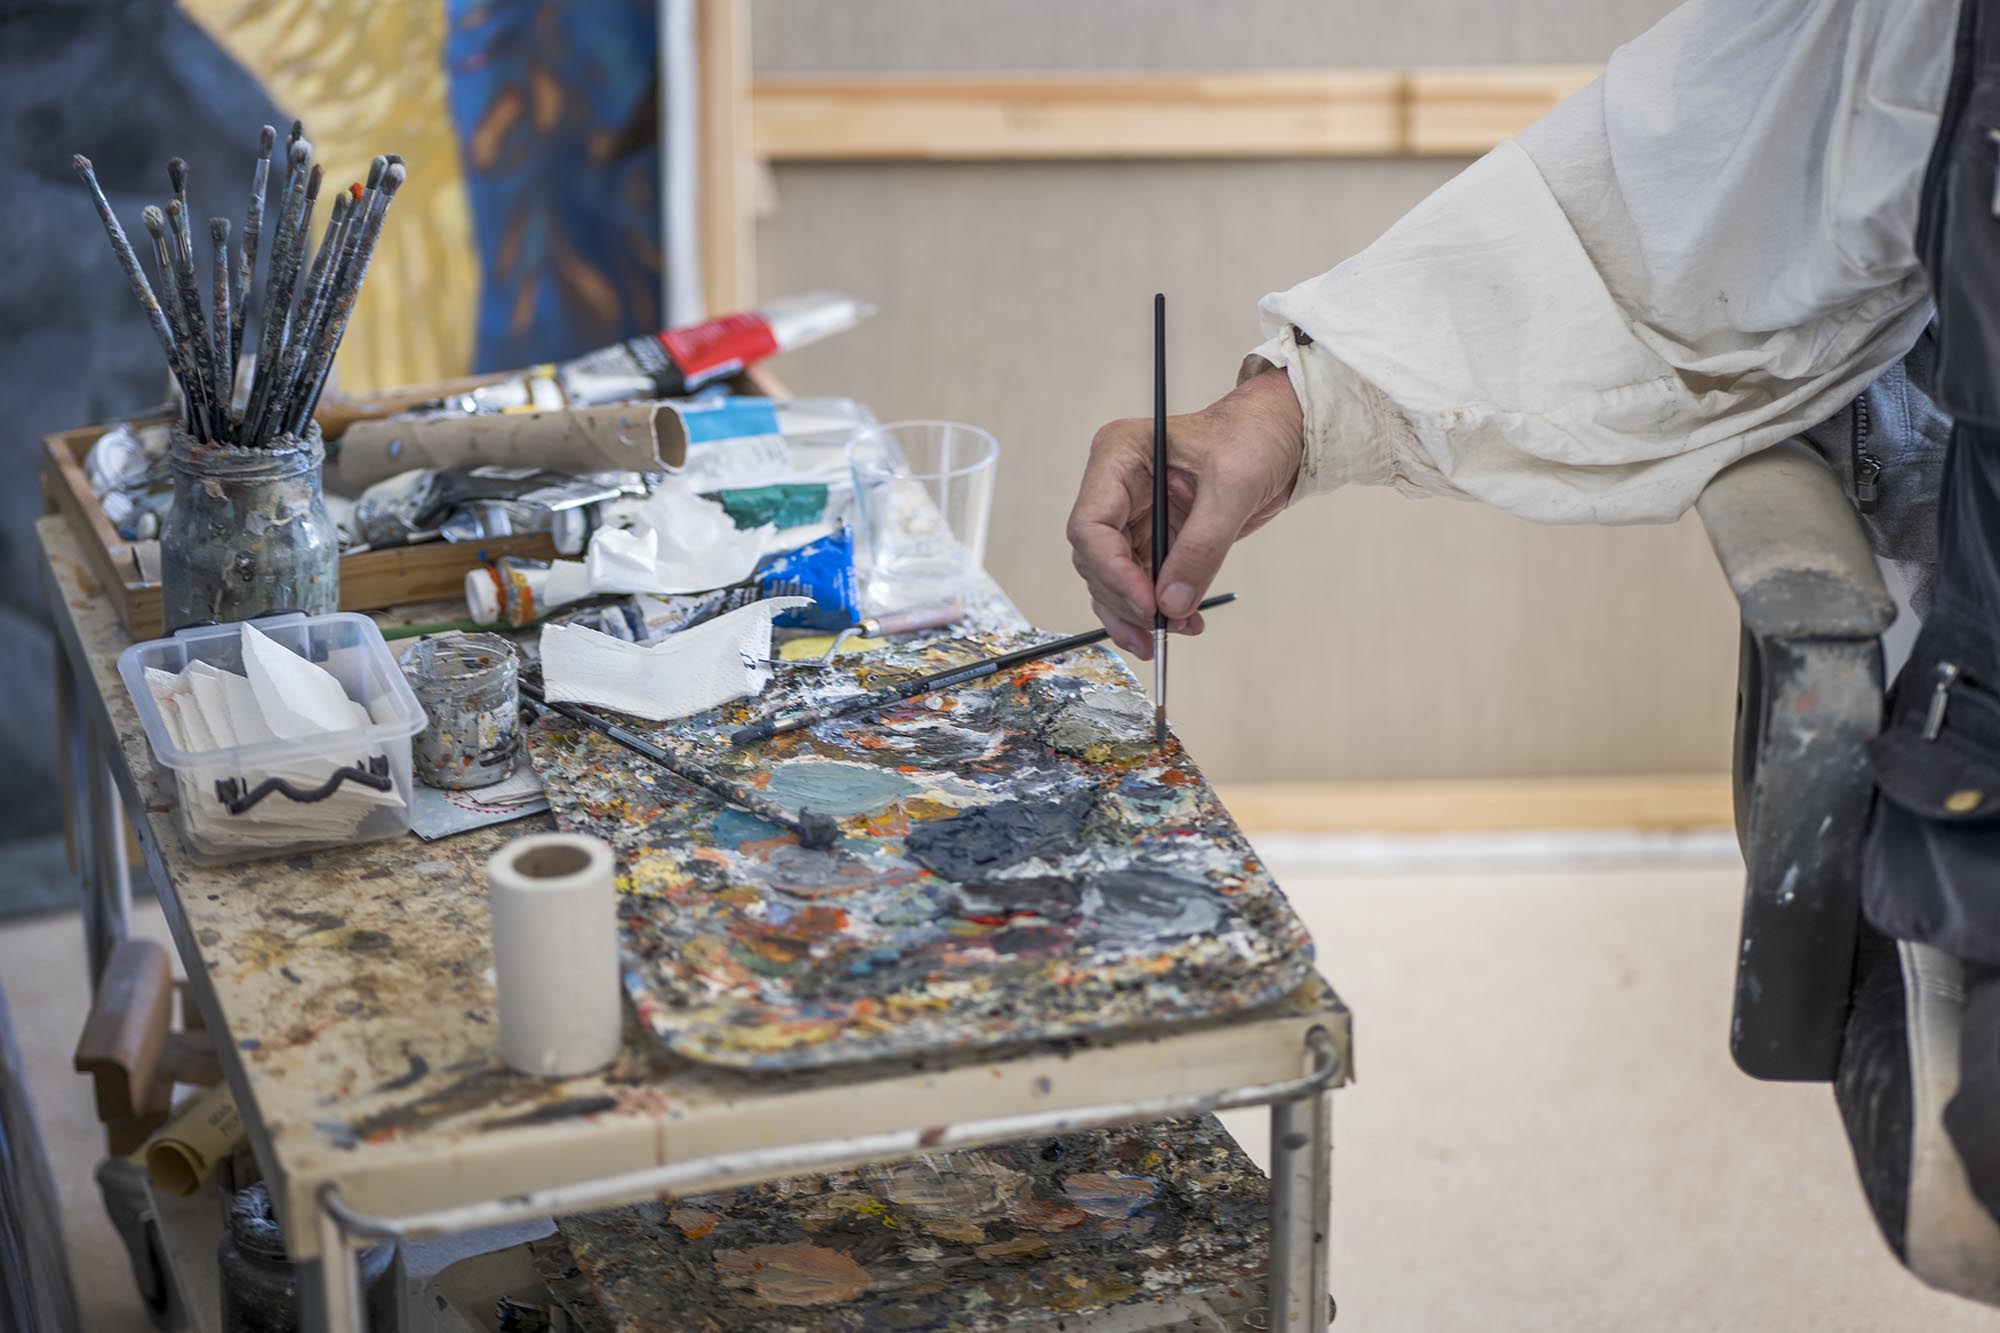 This picture shows artist Lennart Olausson painting in his studio